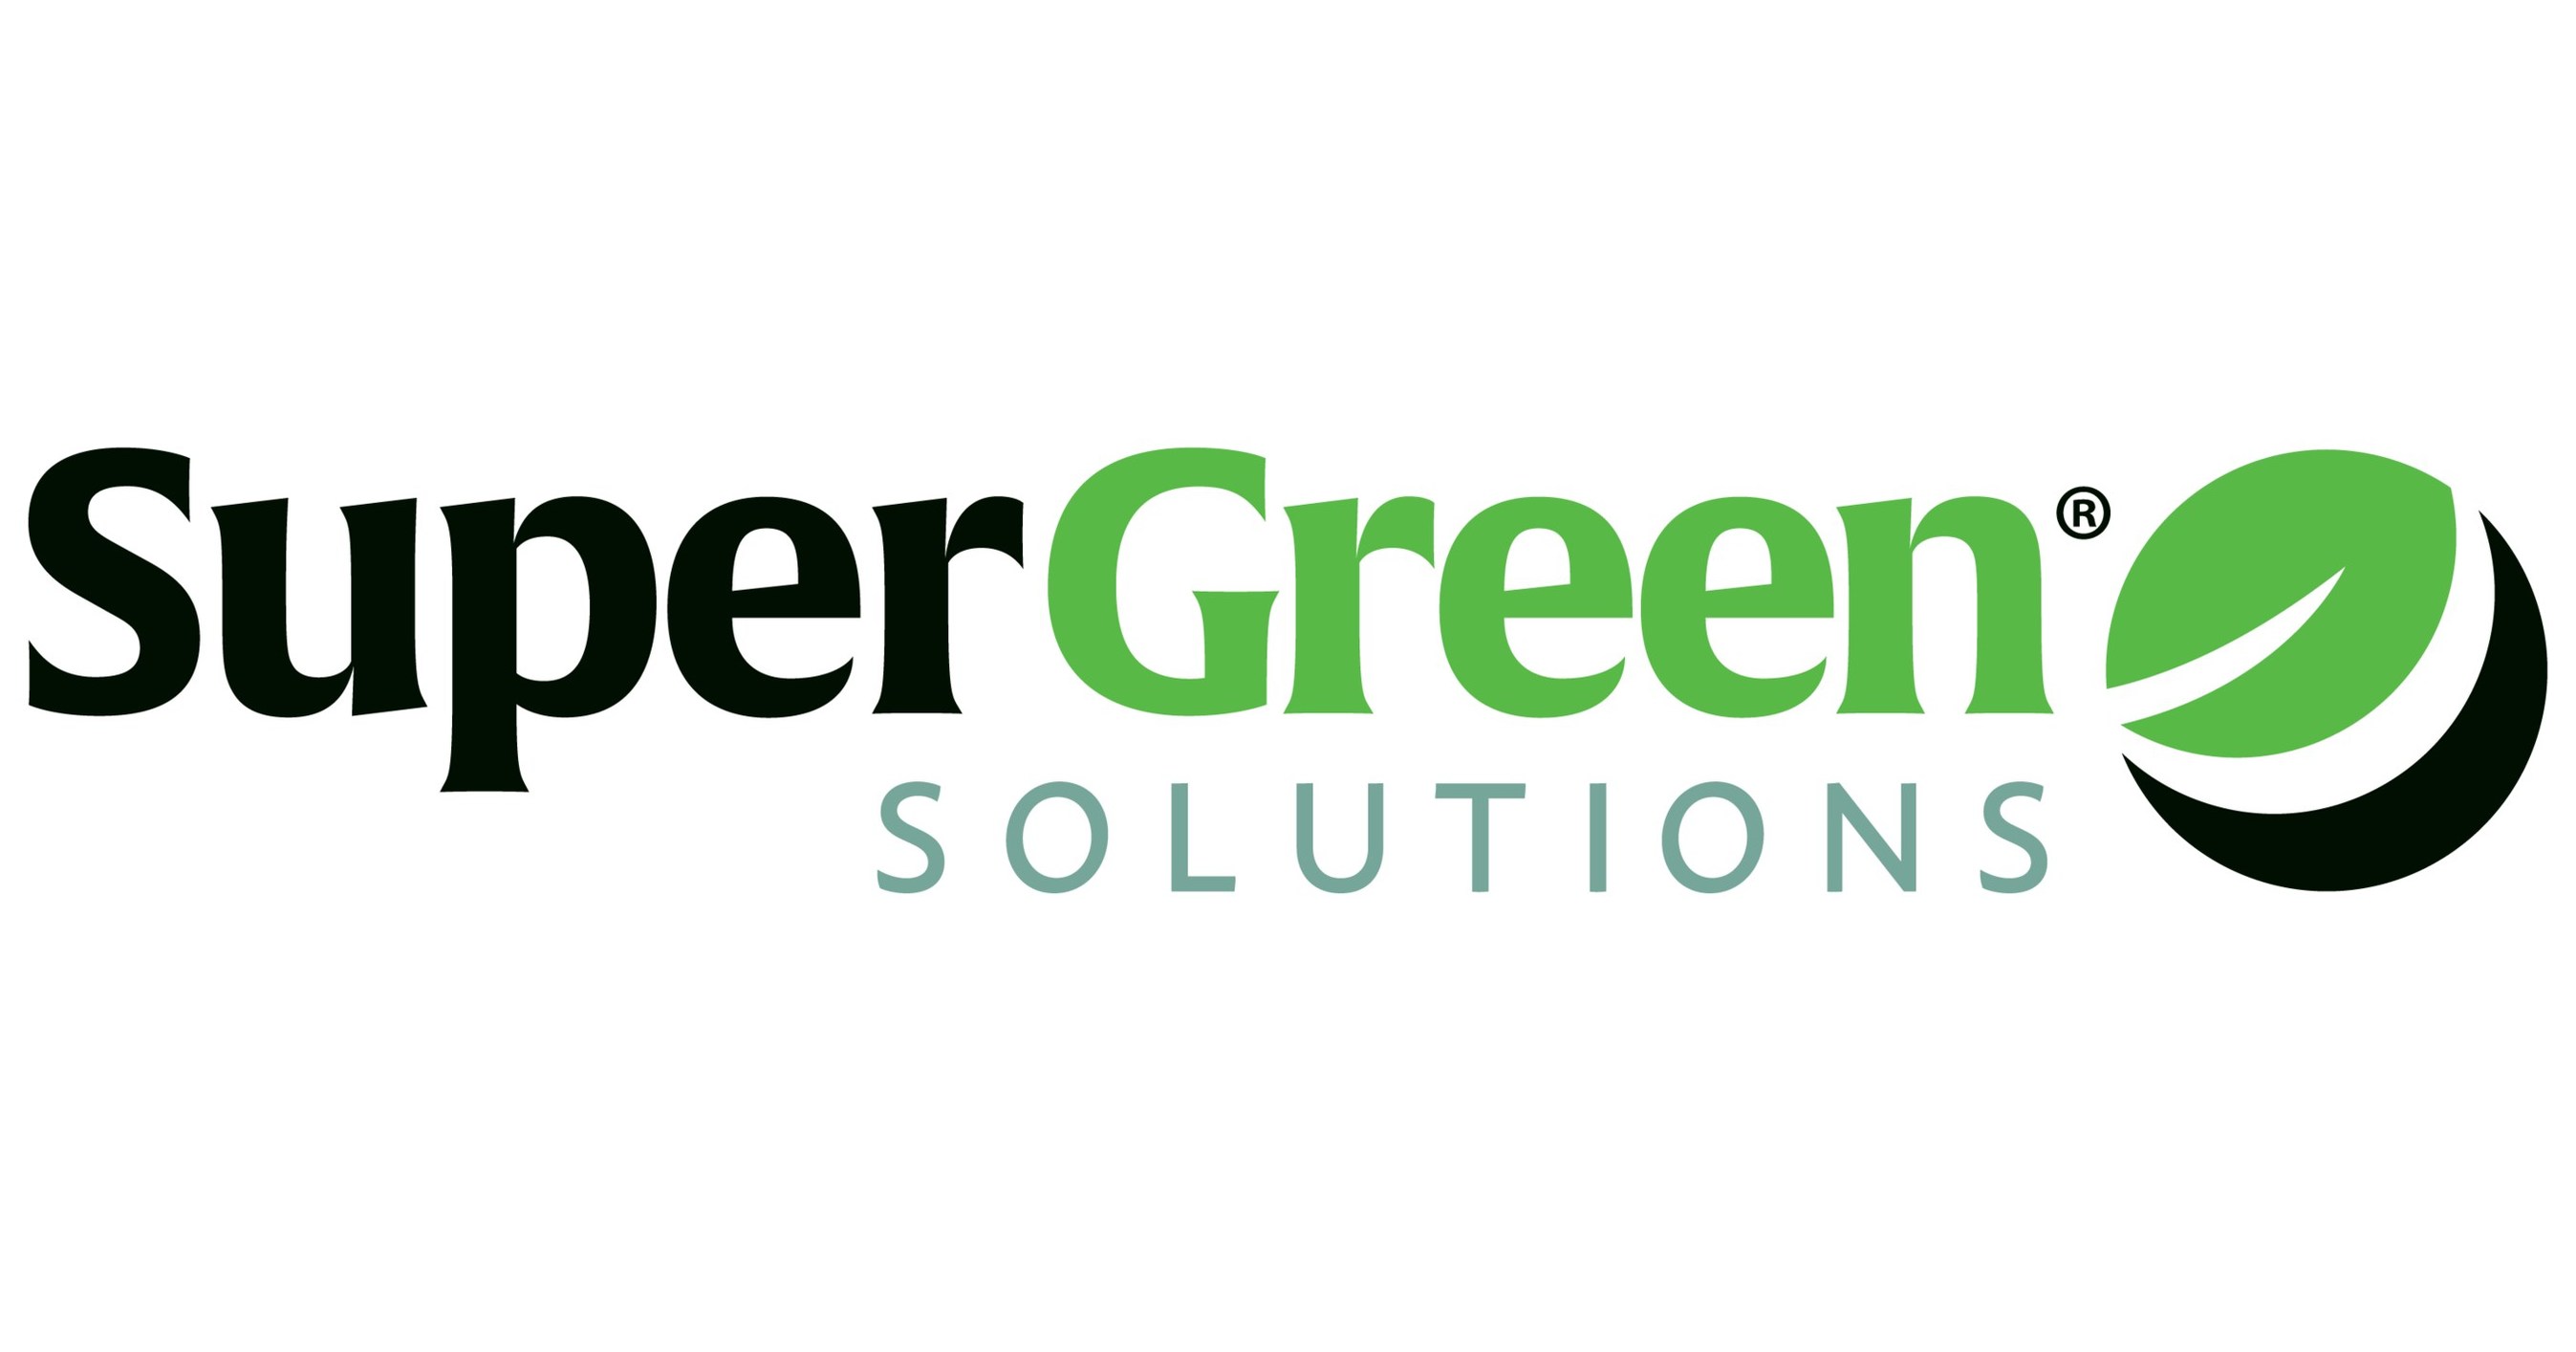 SuperGreen Solutions Integrates State of The Art Software That Gives Homeowners A Quick Solar Estimate That Can Help Them Reduce Their Electricity Bills